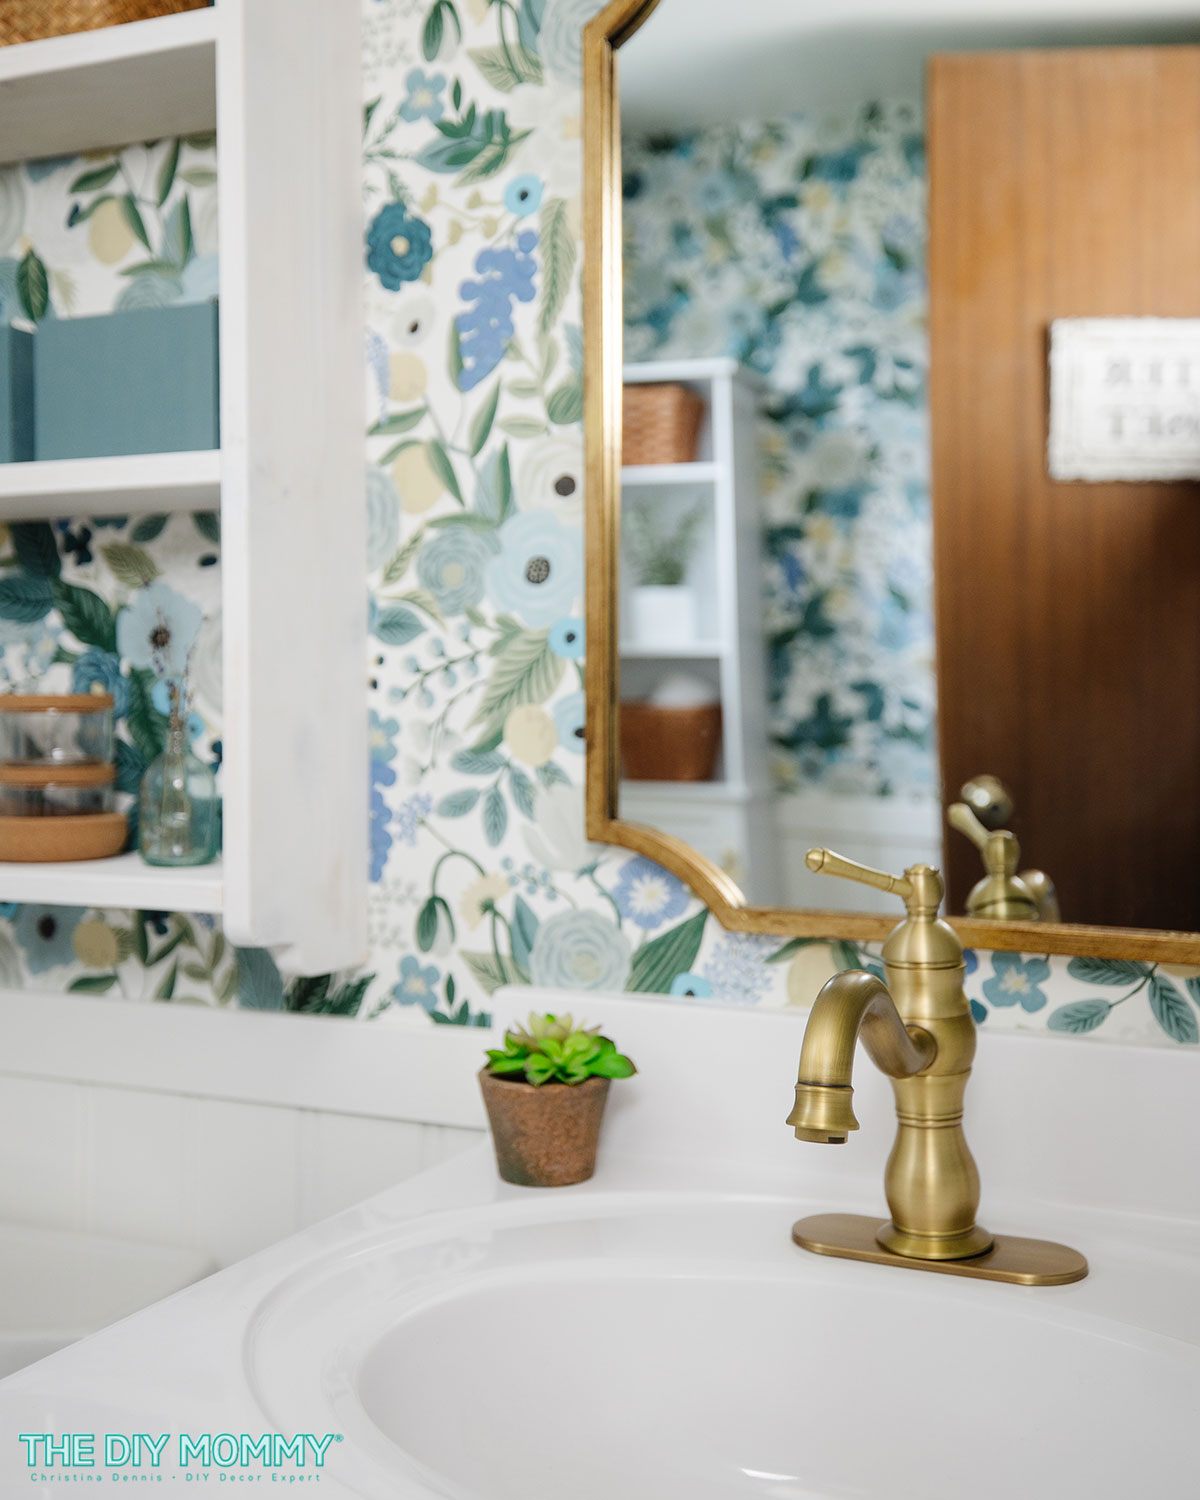 Bathroom Wallpaper, Inspired by Houzz